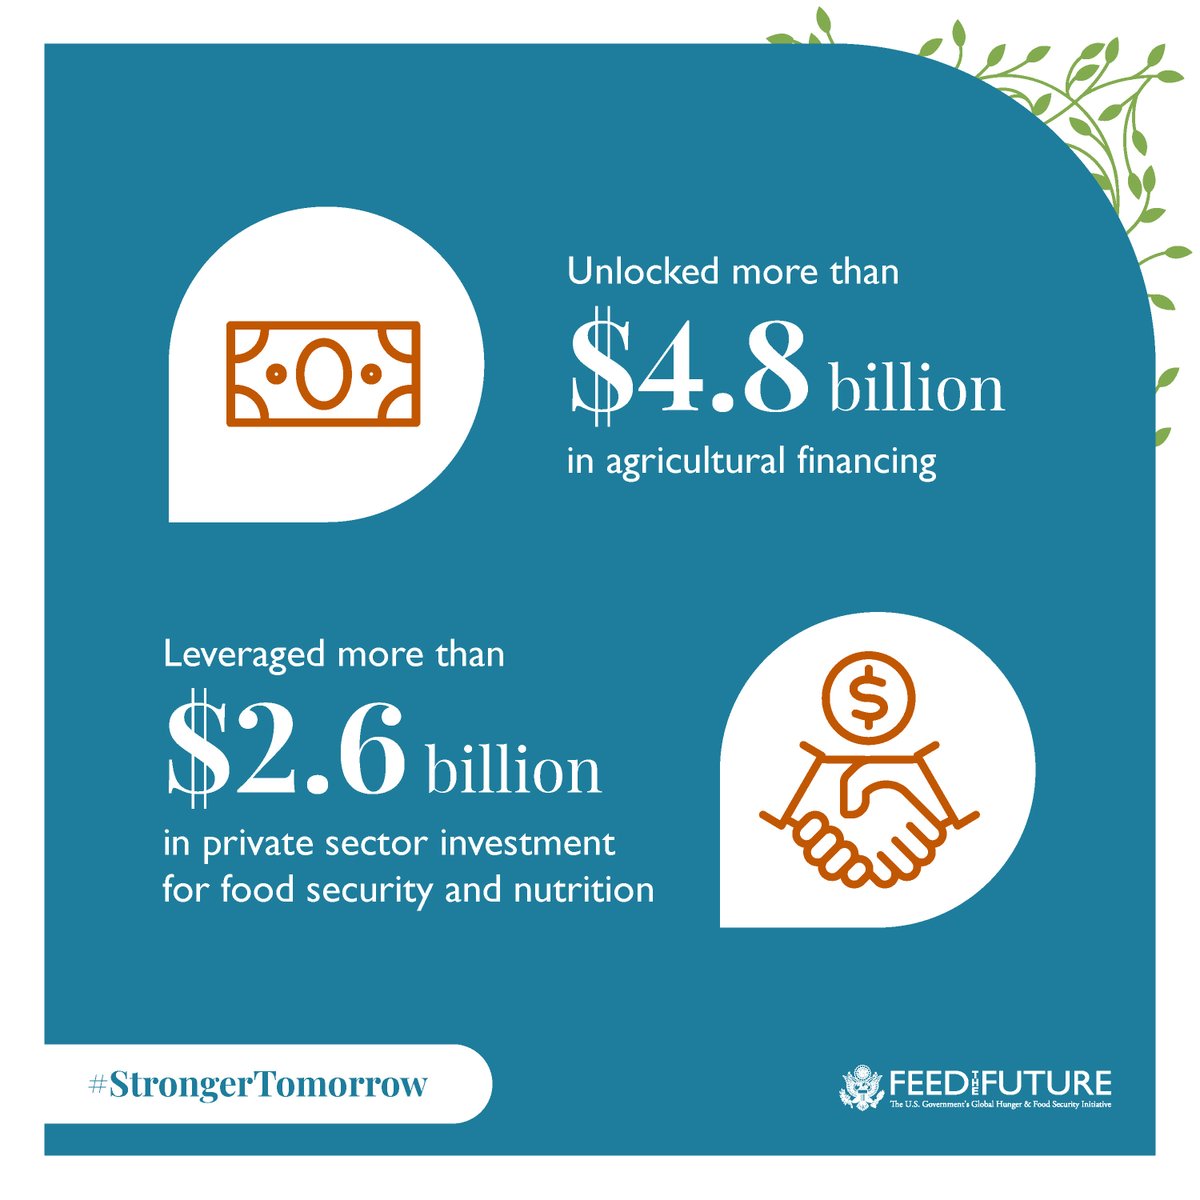 Investments in climate-resilient farming, innovative research, & private sector partnerships are vital to a food-secure future. Since 2011, @FeedtheFuture has unlocked $4.8B in agricultural financing & leveraged $2.6B in private sector investments to build a #StrongerTomorrow